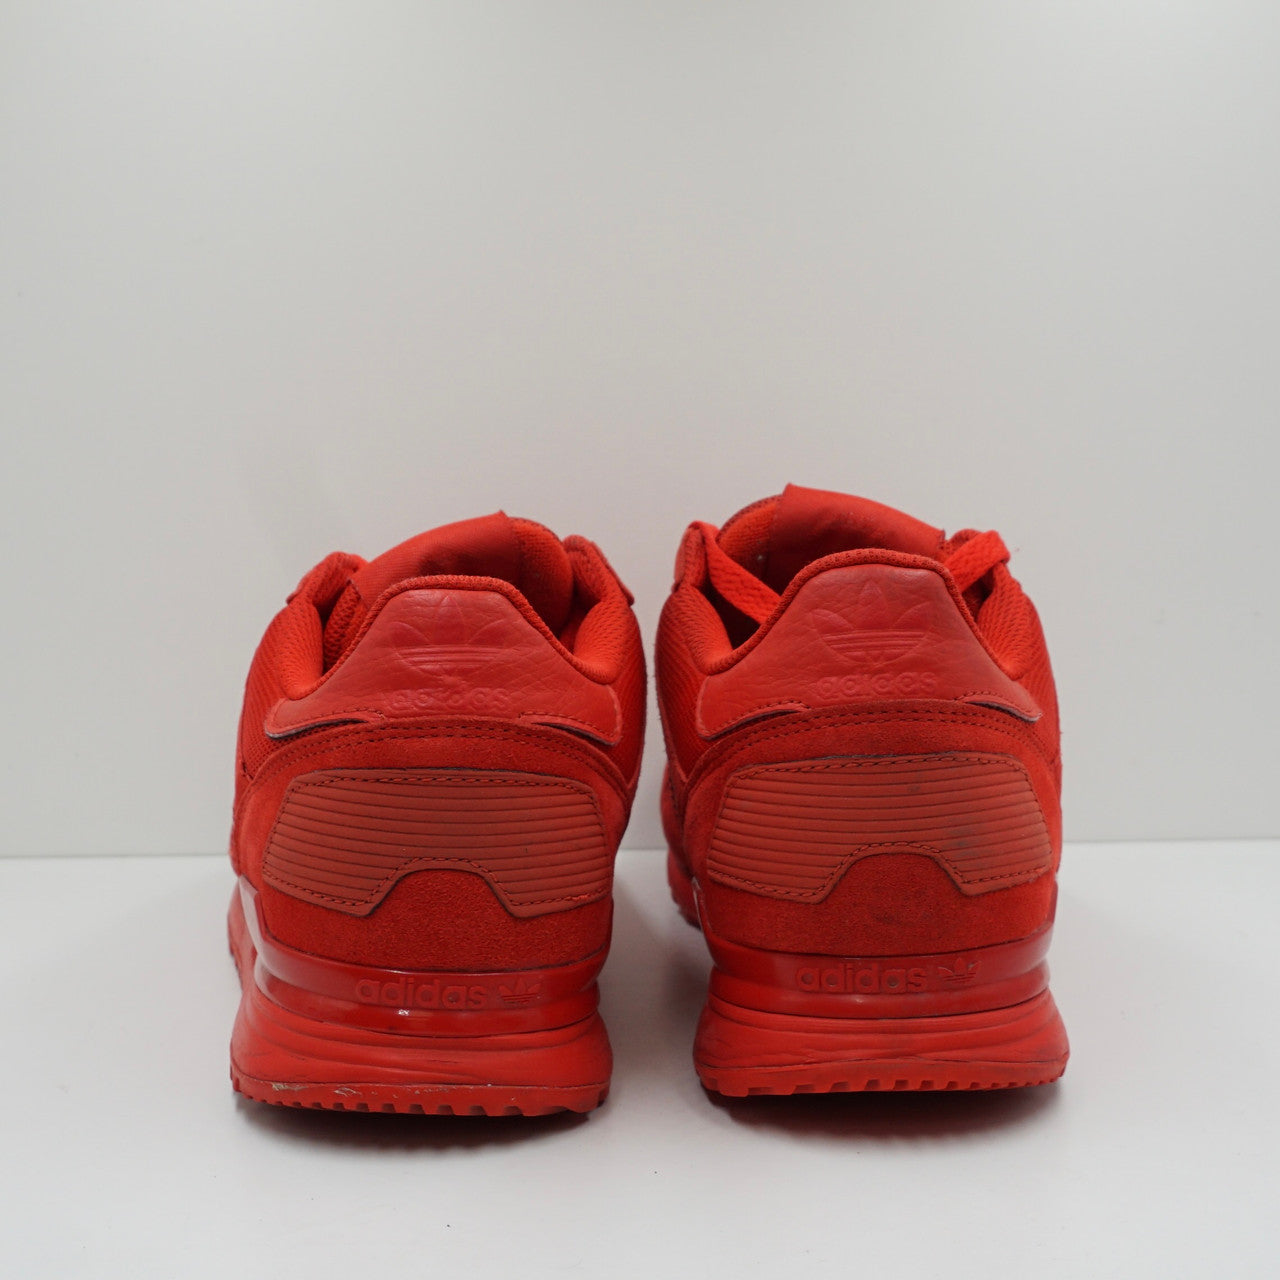 Adidas Zx 700 Red